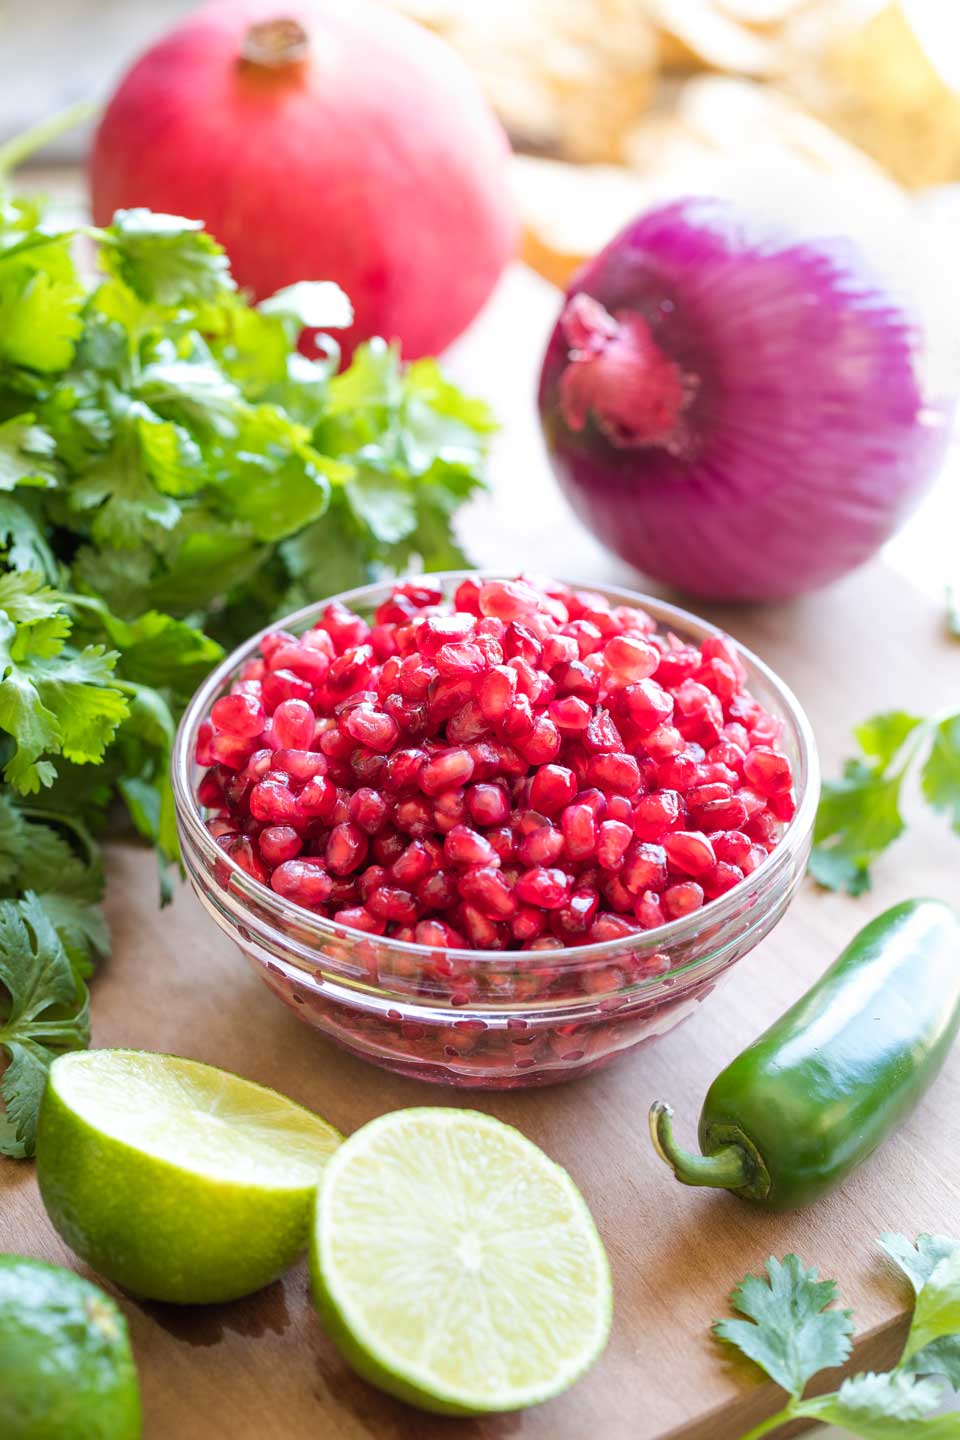 Ingredients for Pomegranate Salsa arranged on a cutting board, including a small bowl of arils, limes, a jalapeno, a bunch of cilantro, and a red onion.